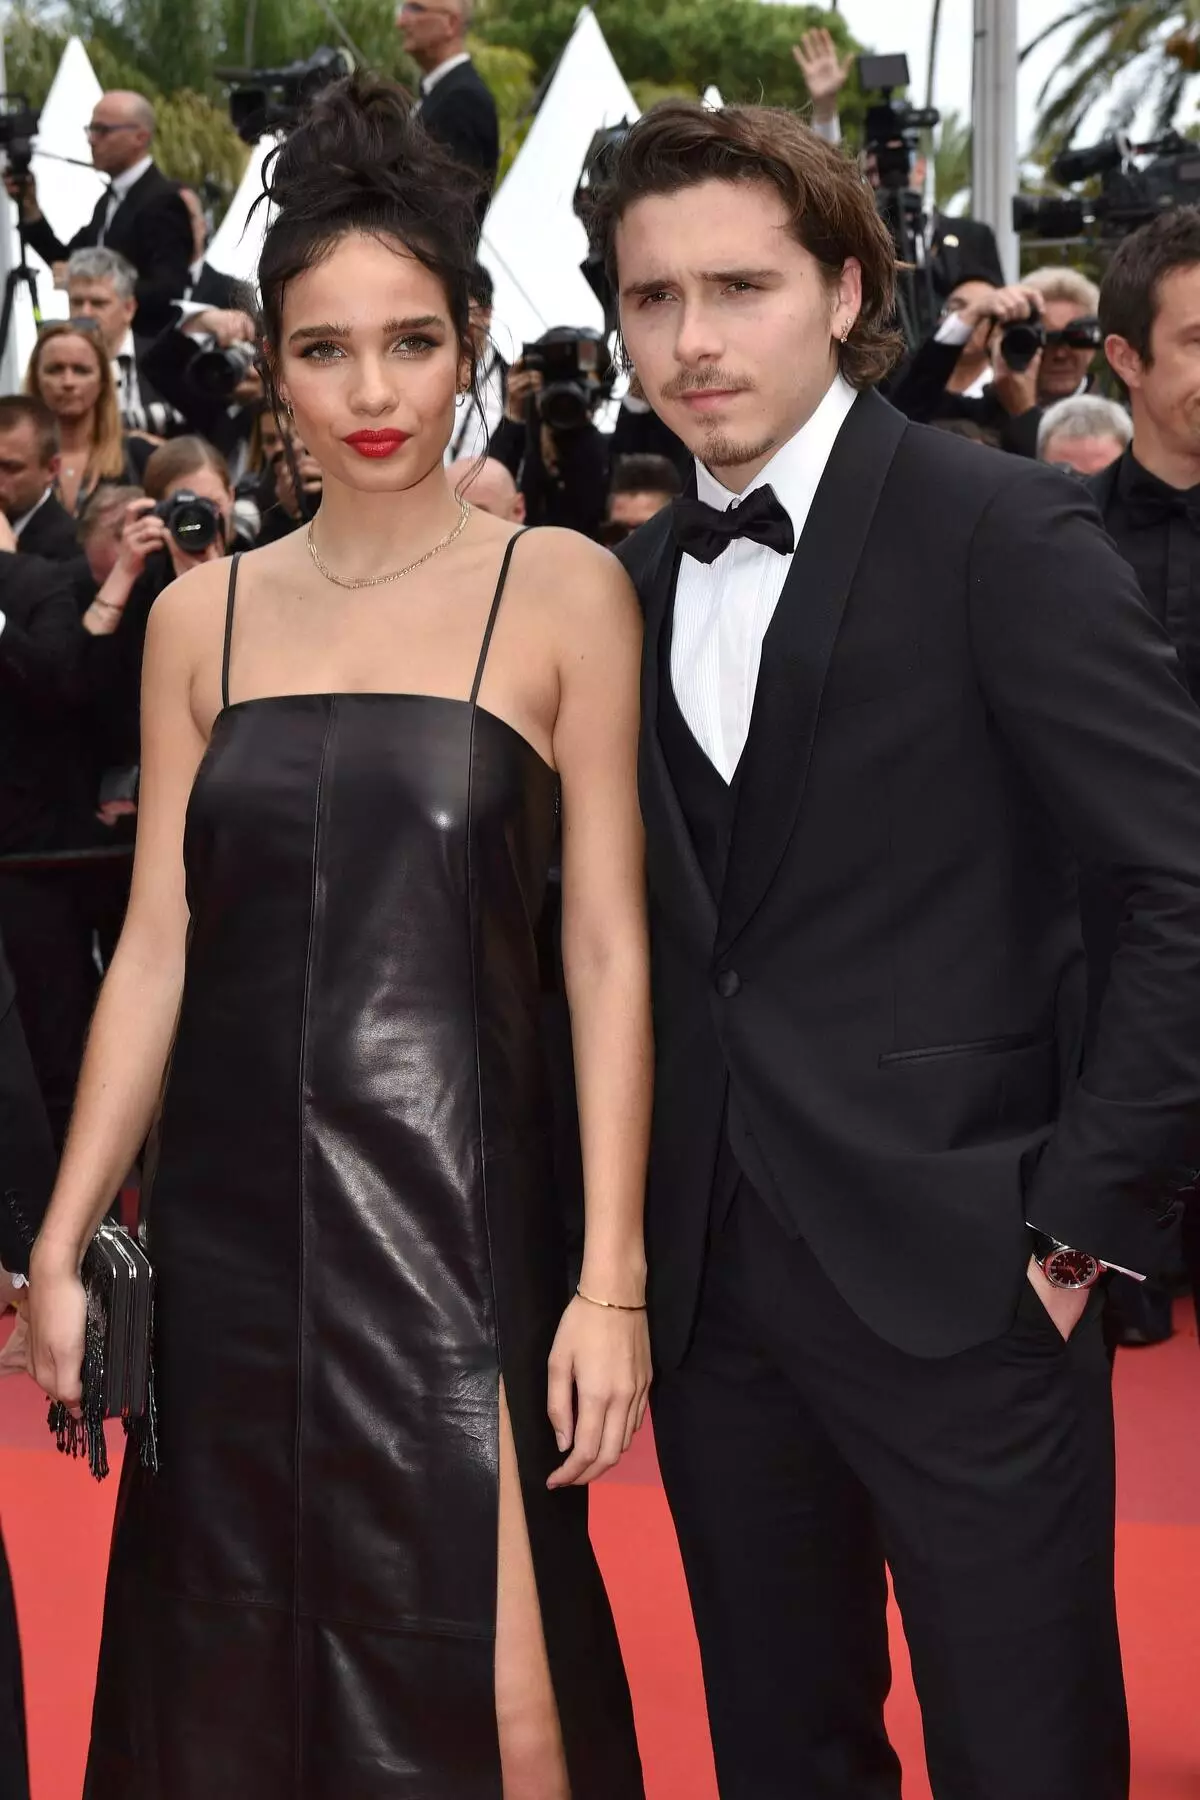 Media: Brooklyn Beckham and Hannah Cross rushed in Cannes 104778_4